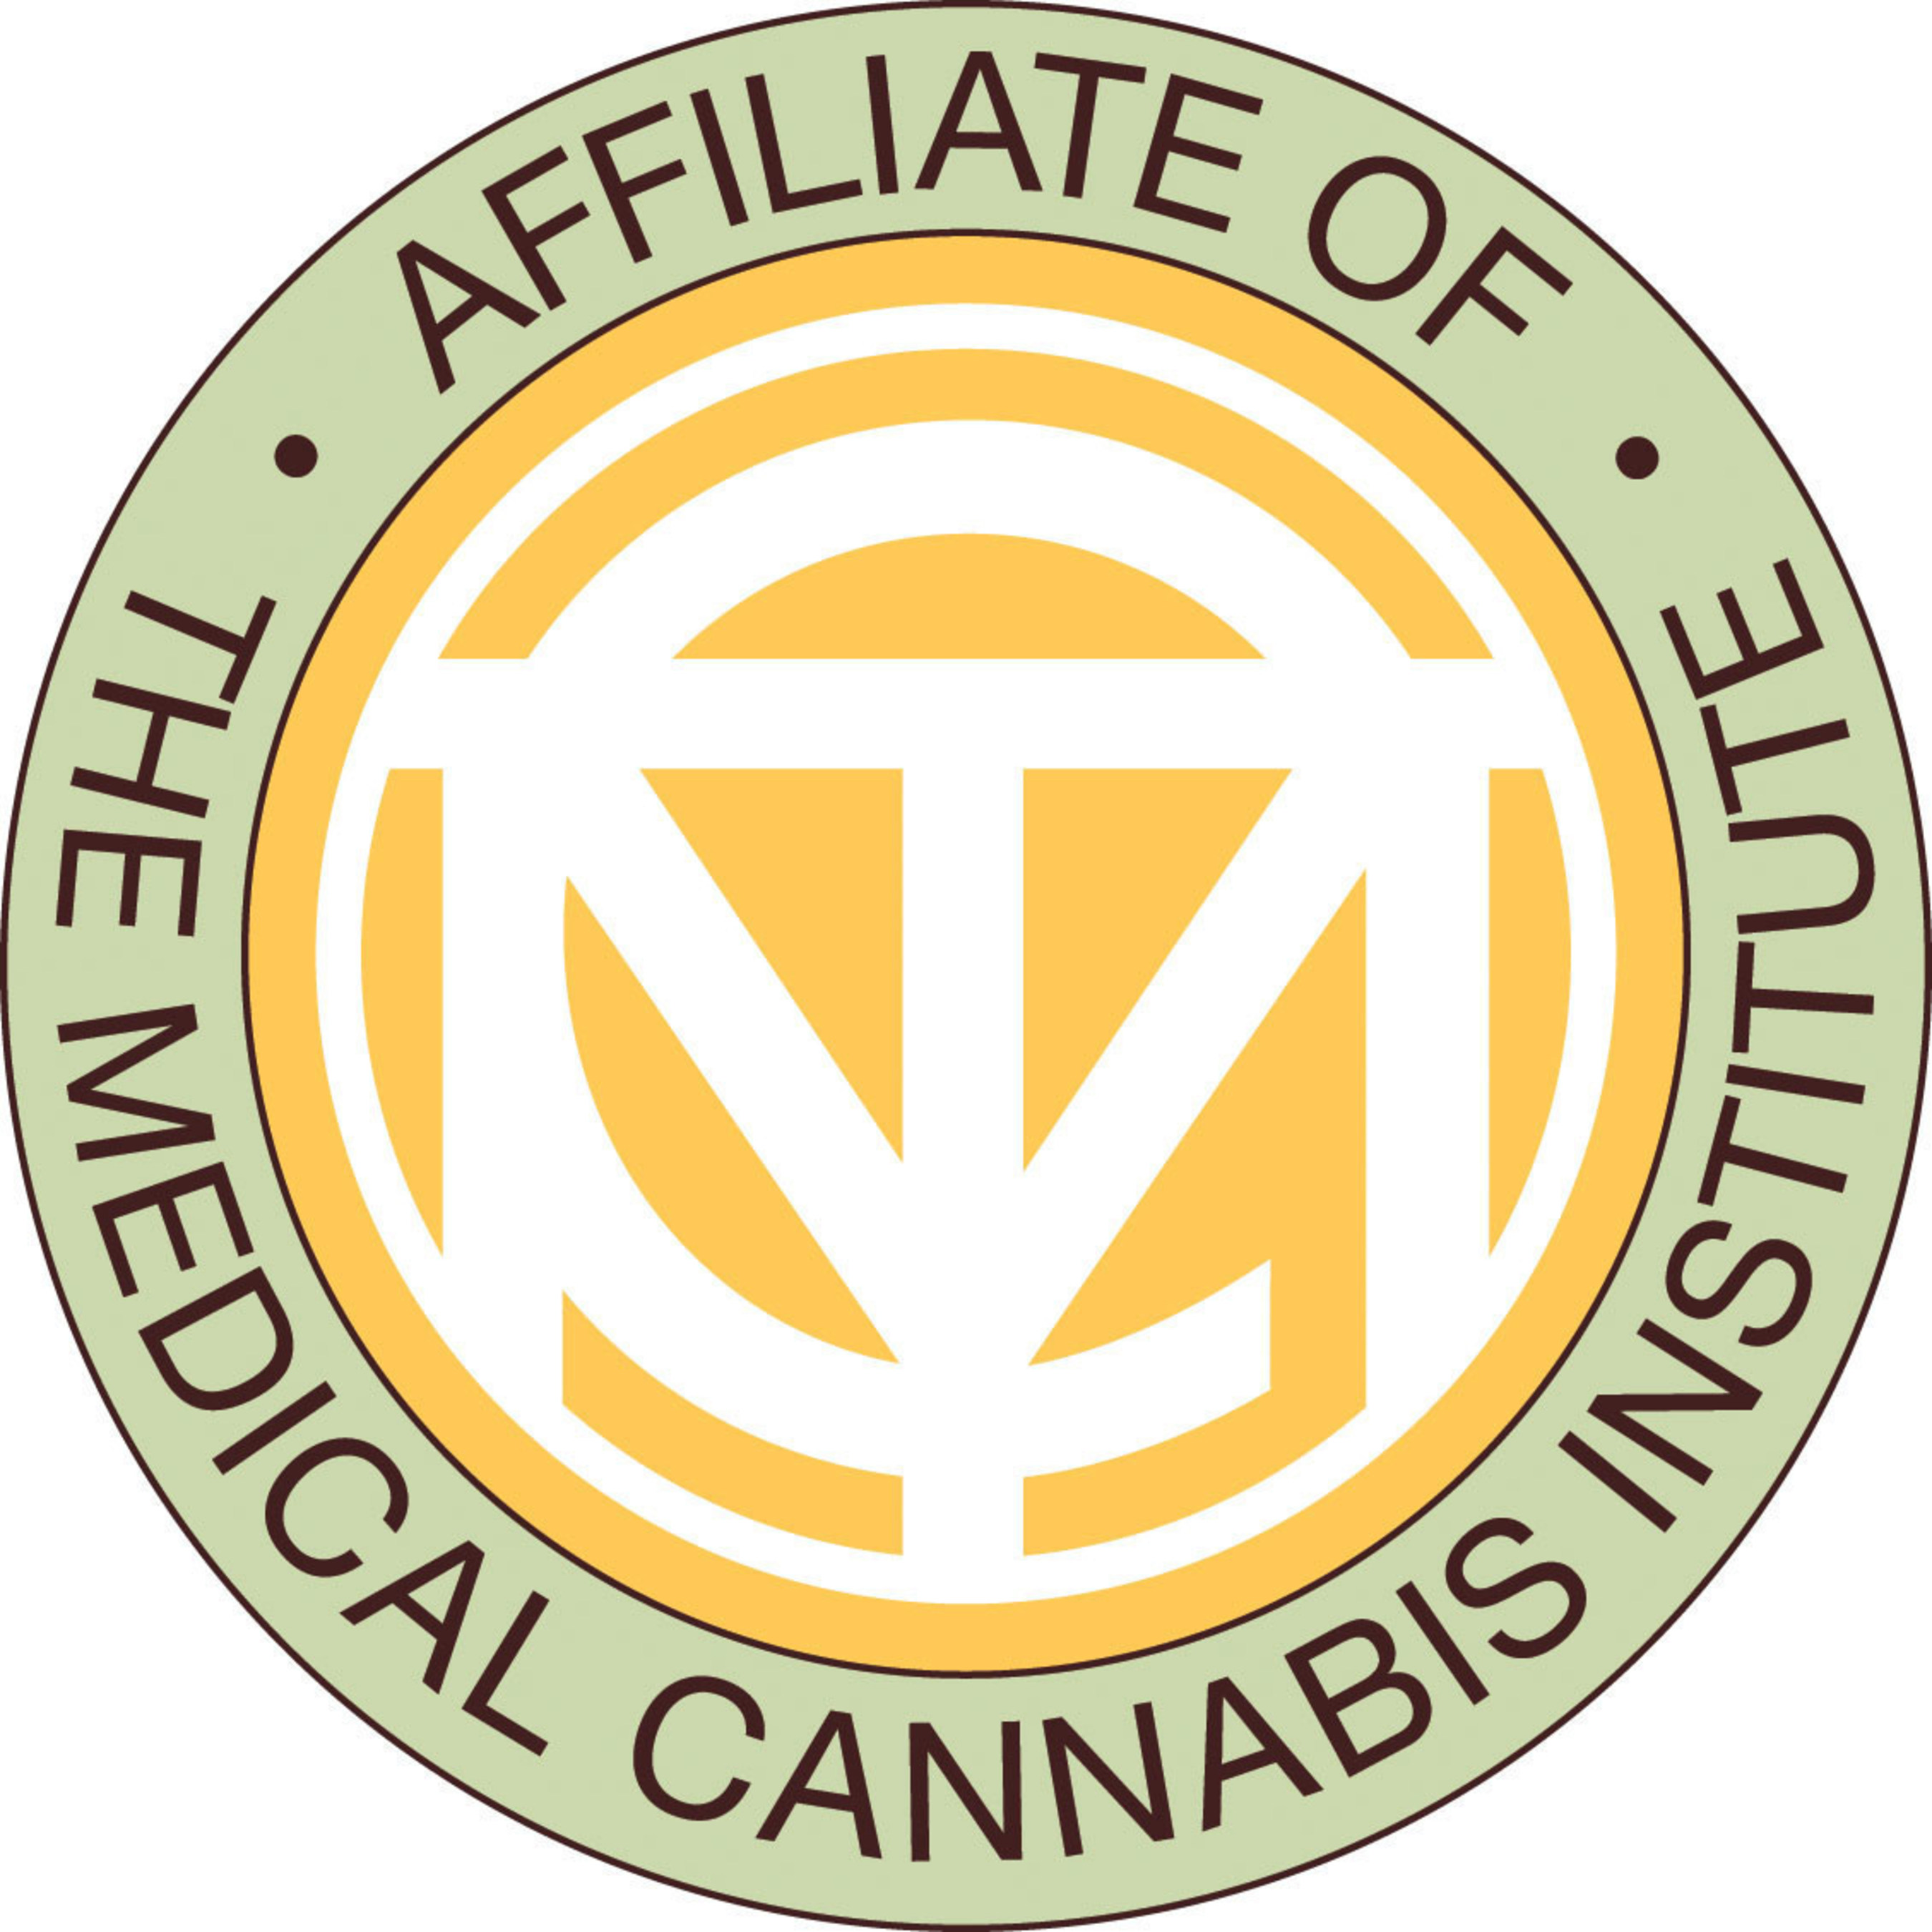 The Medical Cannabis Institute launched its new affiliate program today, expanding the reach of its educational programming to new audiences within the patient community, as well as to new global markets in Central and Southern Europe. As part of the TMCI program, affiliates serve as education ambassadors for medical cannabis education. The TMCI program provides access to a range of affiliate resources, including the TMCI Affiliate seal and guidelines, as well as print and web materials on the medical...